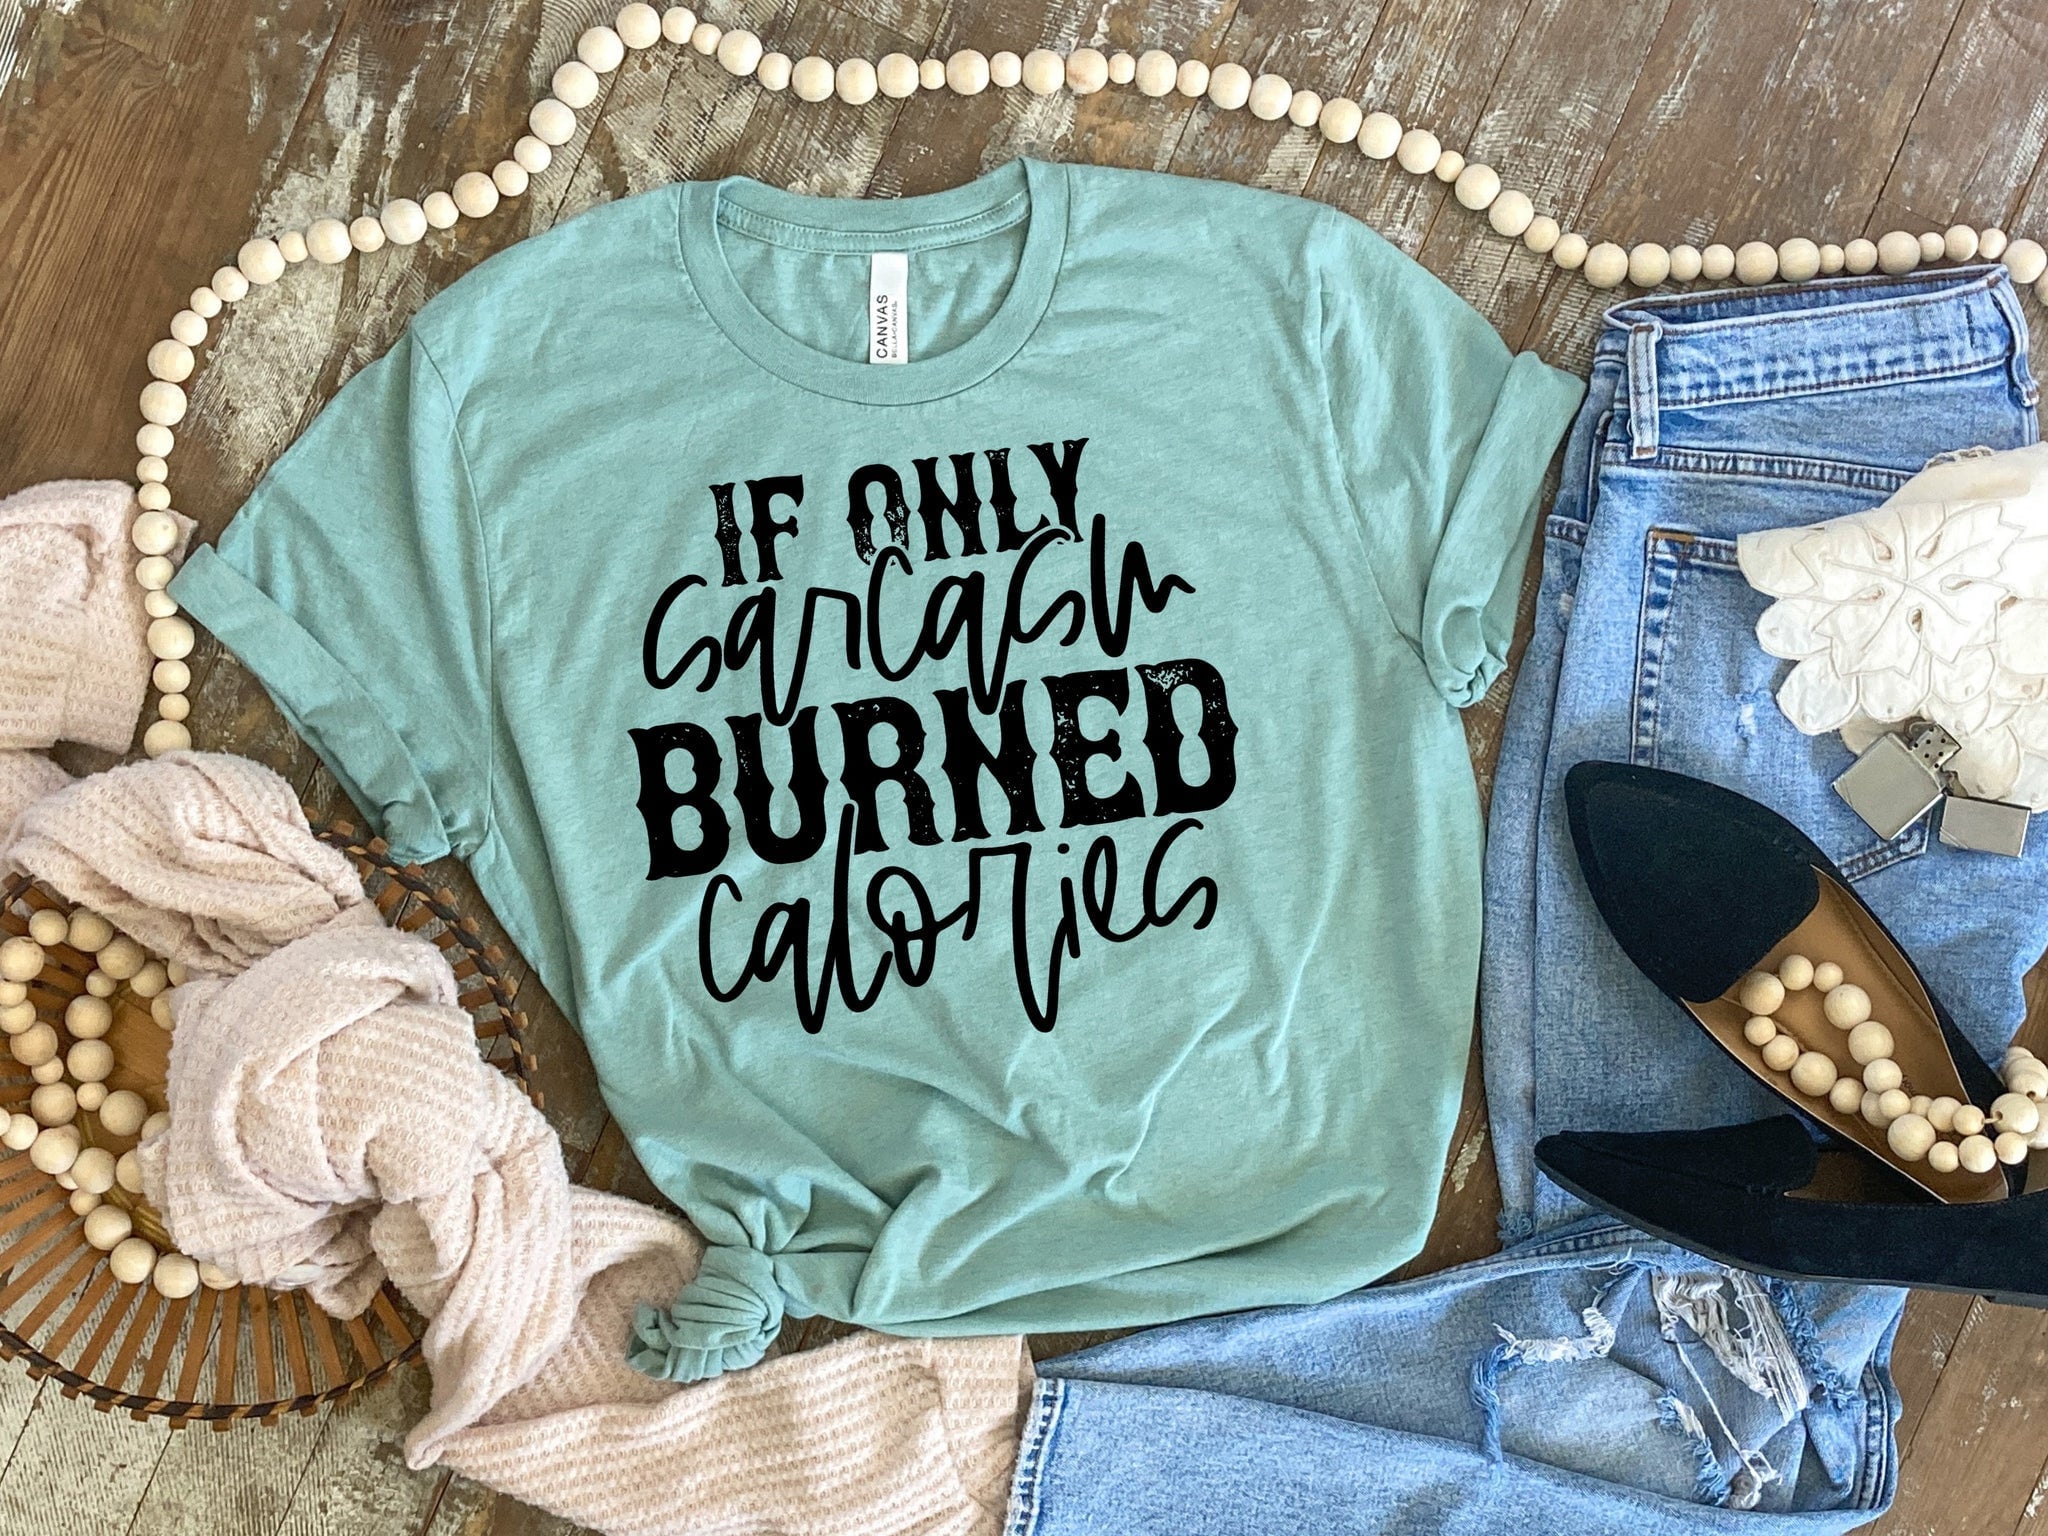 If Only Sarcasm Burned Calories Tee